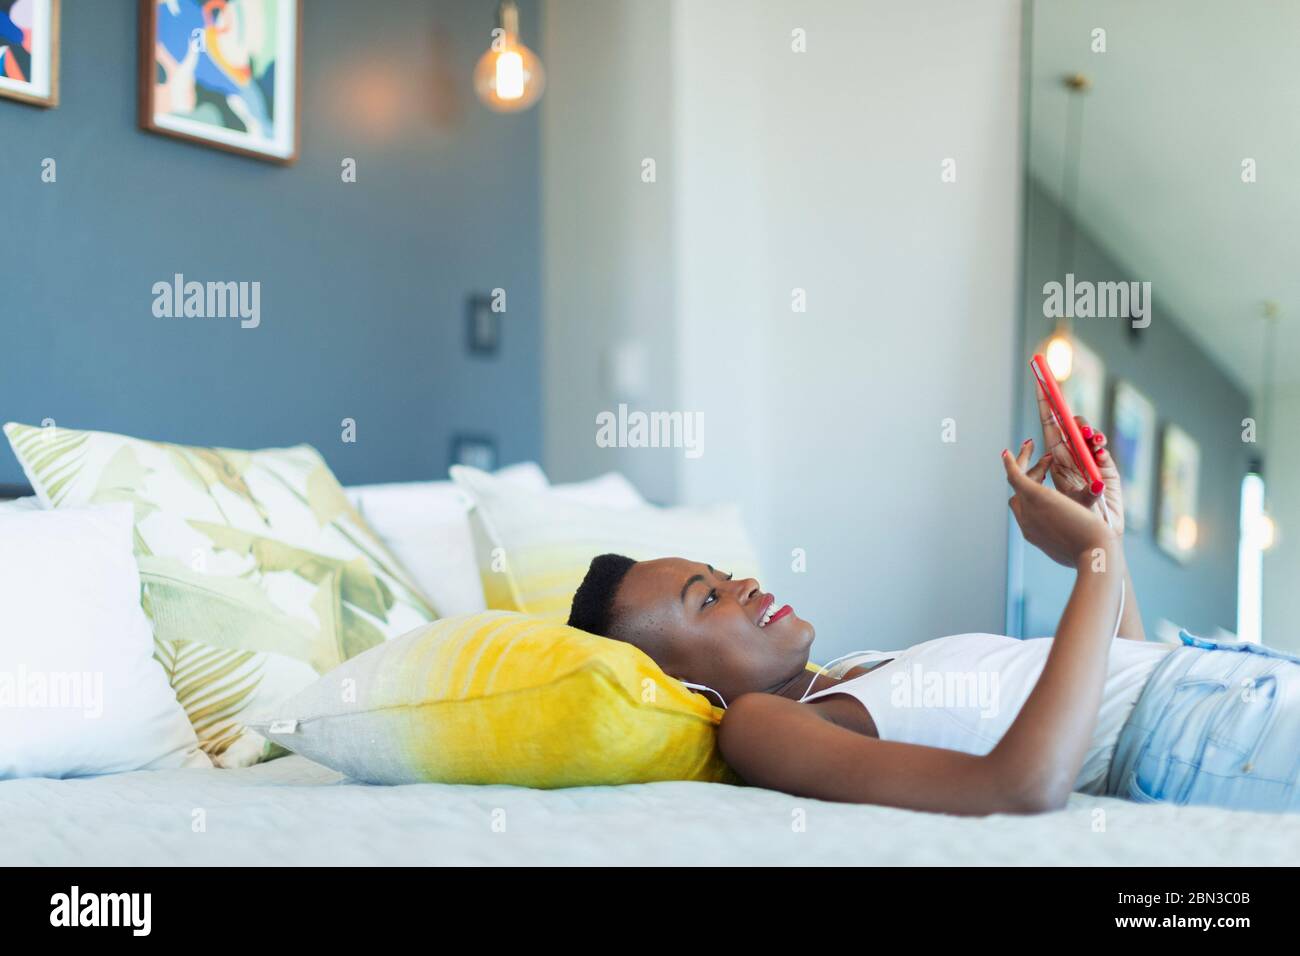 Young woman relaxing on bed, listening to music with headphones and mp3 player Stock Photo